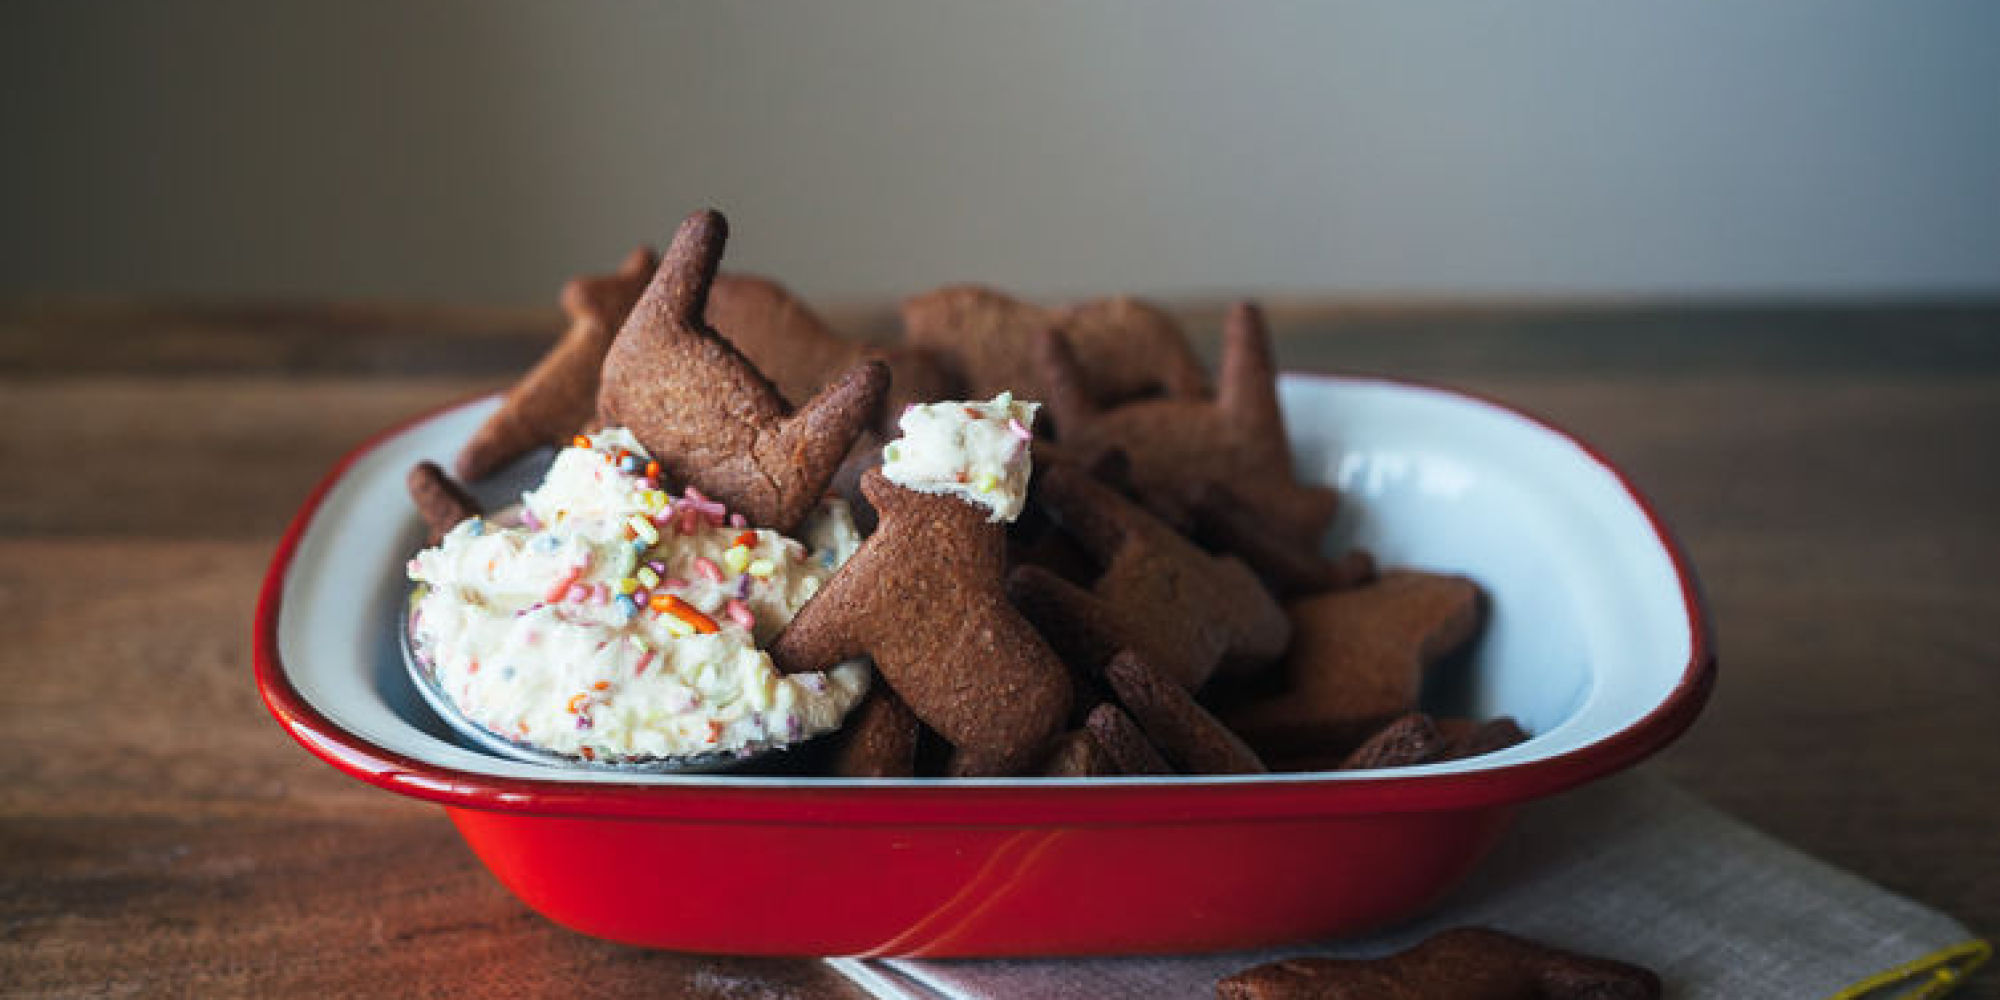 How to Make Dunkaroos at Home | HuffPost2000 x 1000